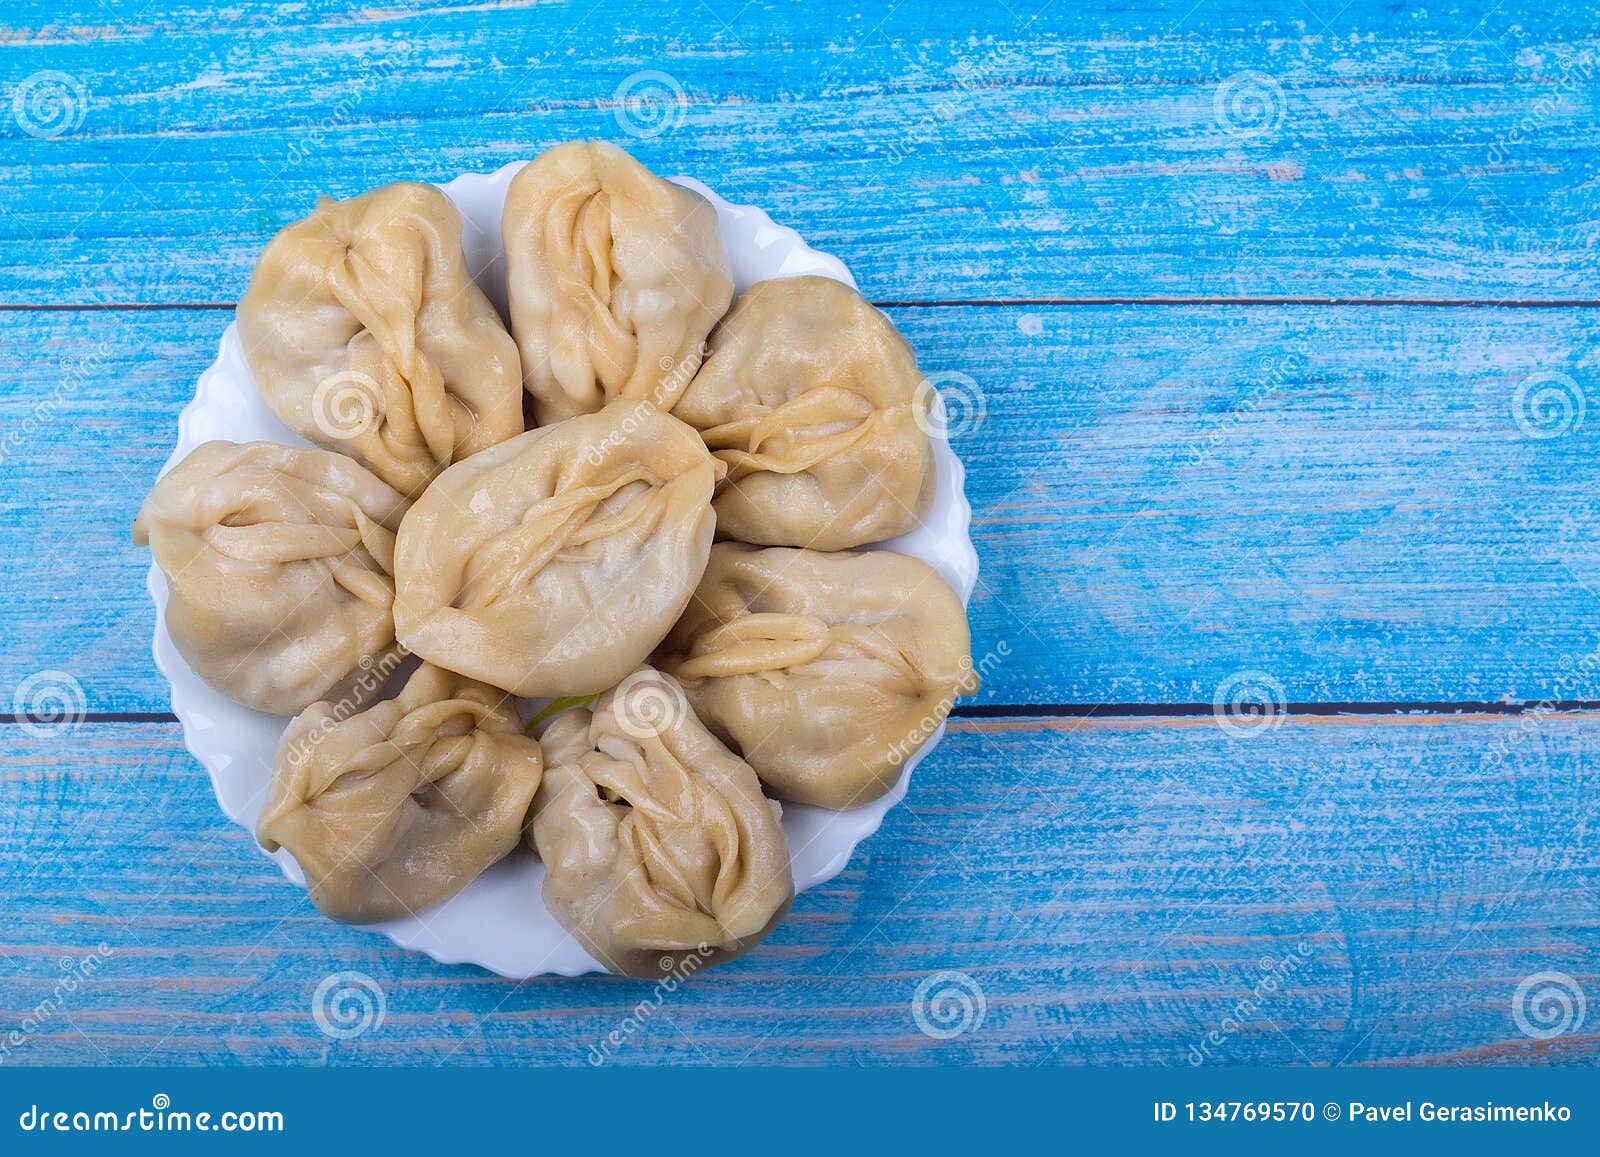 Delicious mantas on a white plate on blue wooden background, Asian cuisine, traditional national dish.